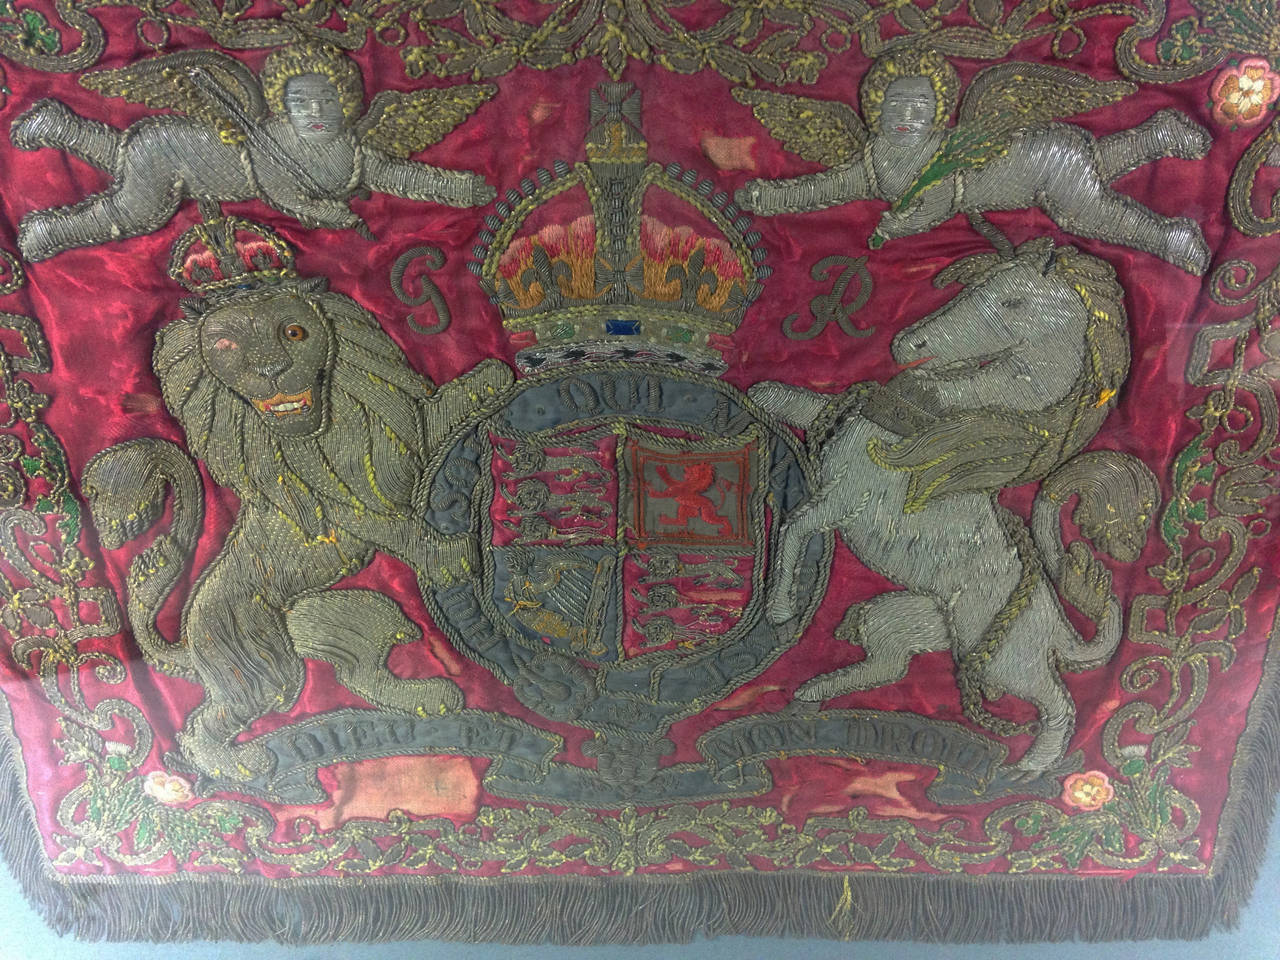 An extremely rare George V era Household Cavalry trumpet banner (1910-1936). 

A crimson damask silk ground, embroidered with the Royal Coat of Arms of George V in gold and silver bullion wire. Edged along 3 sides with a gold thread fringe.